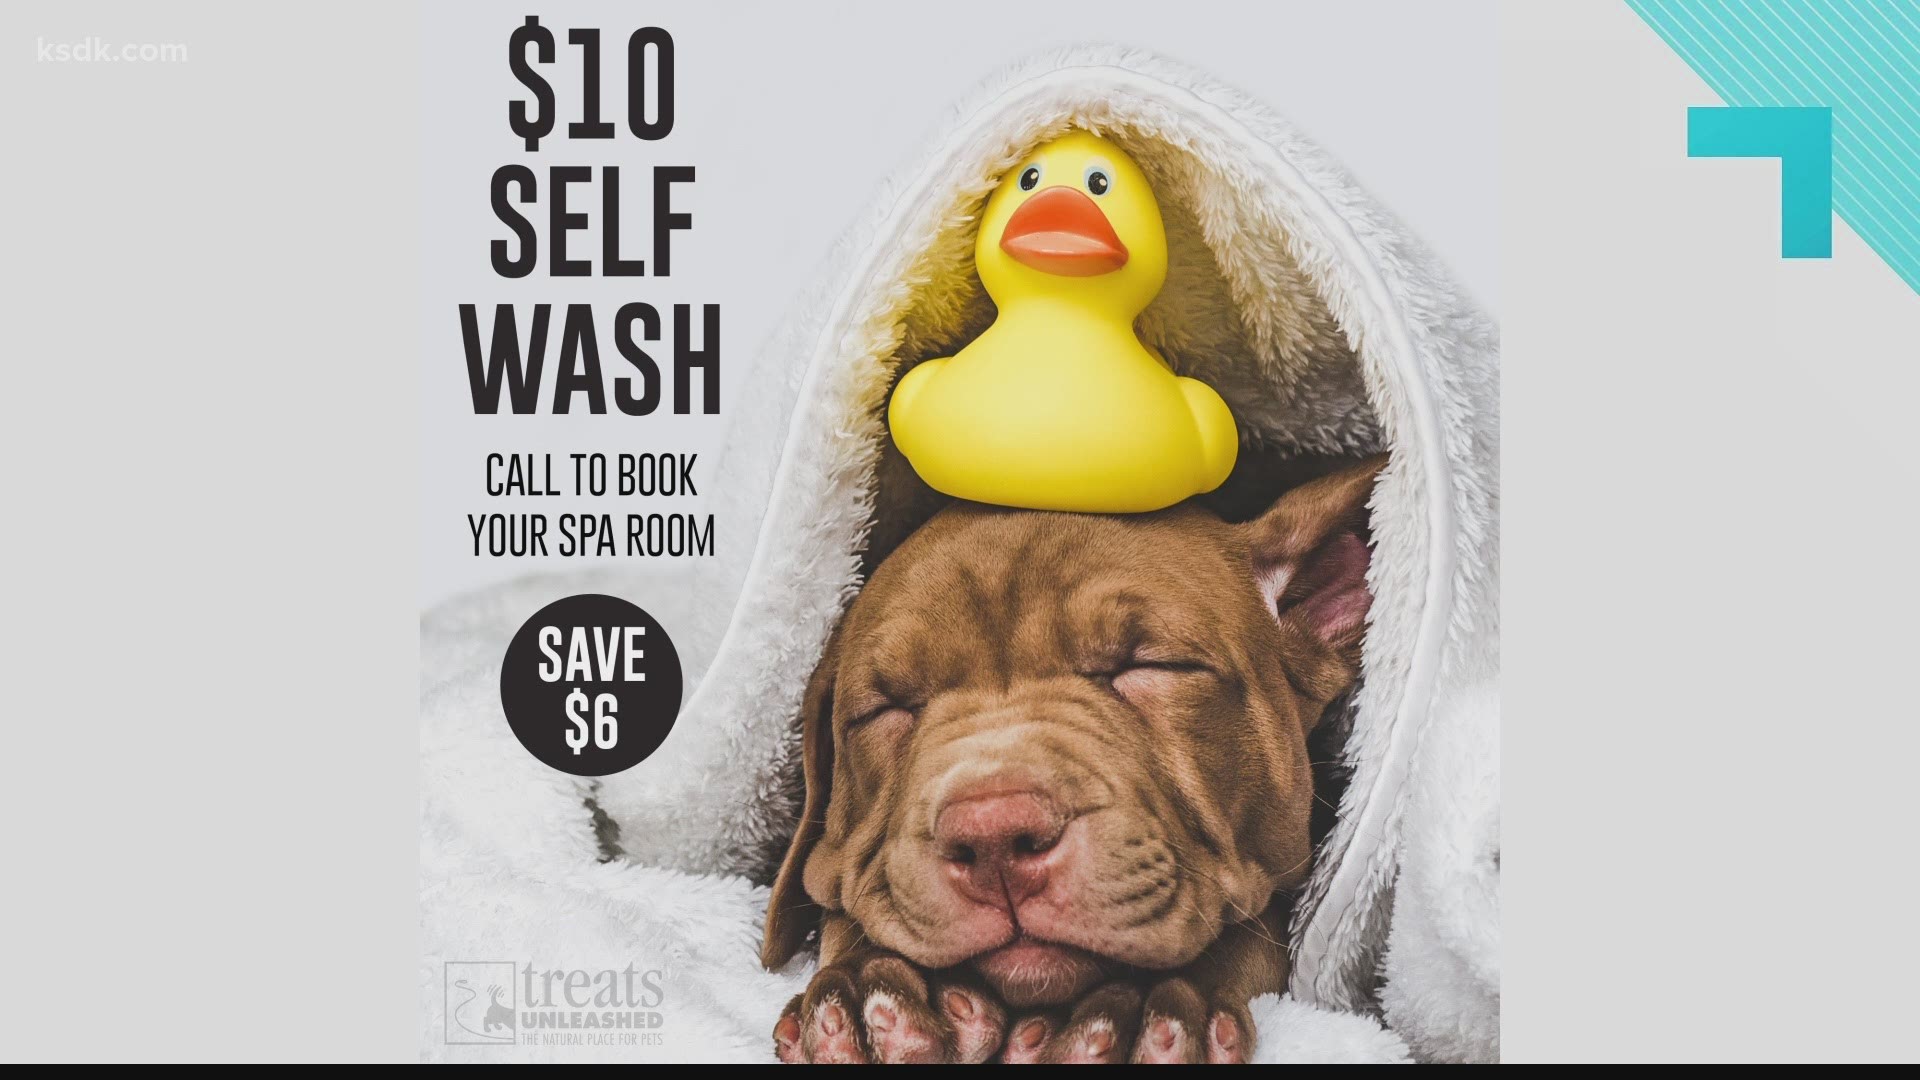 Cleaning your pet is easy when you go to the self-wash suite at Treats Unleashed.